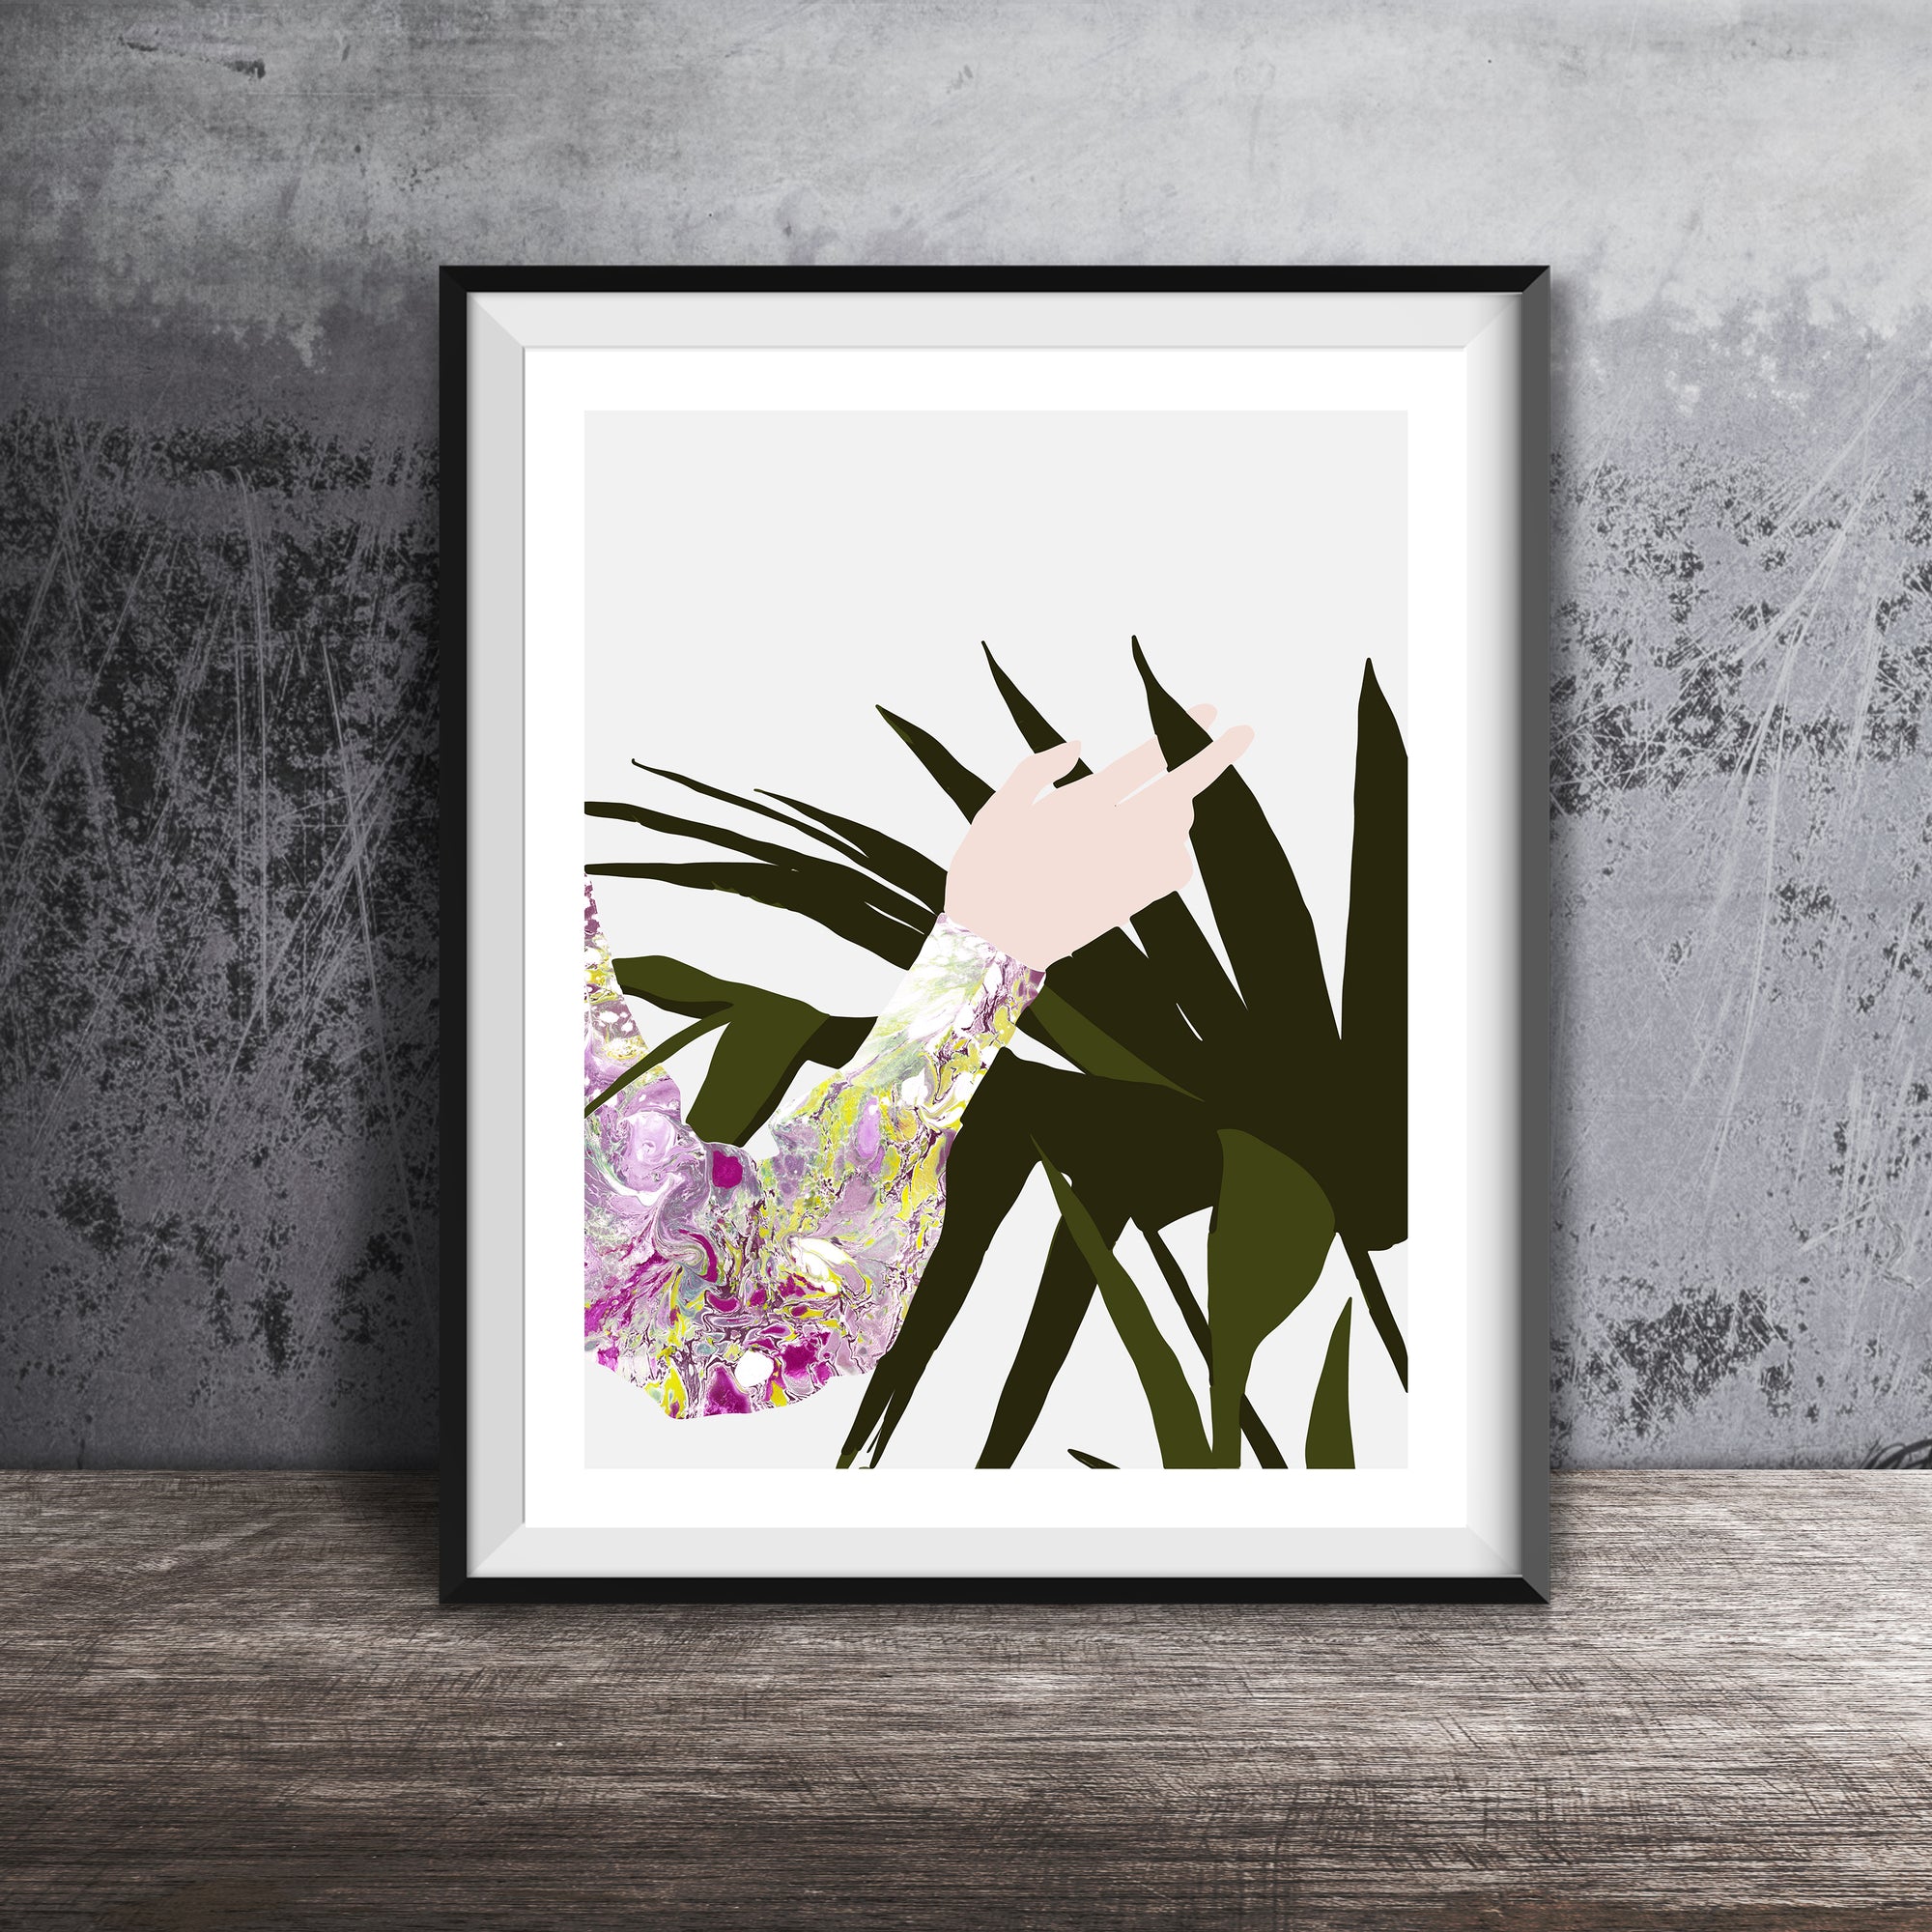 HAND WITH PLANT Art Print 8x10